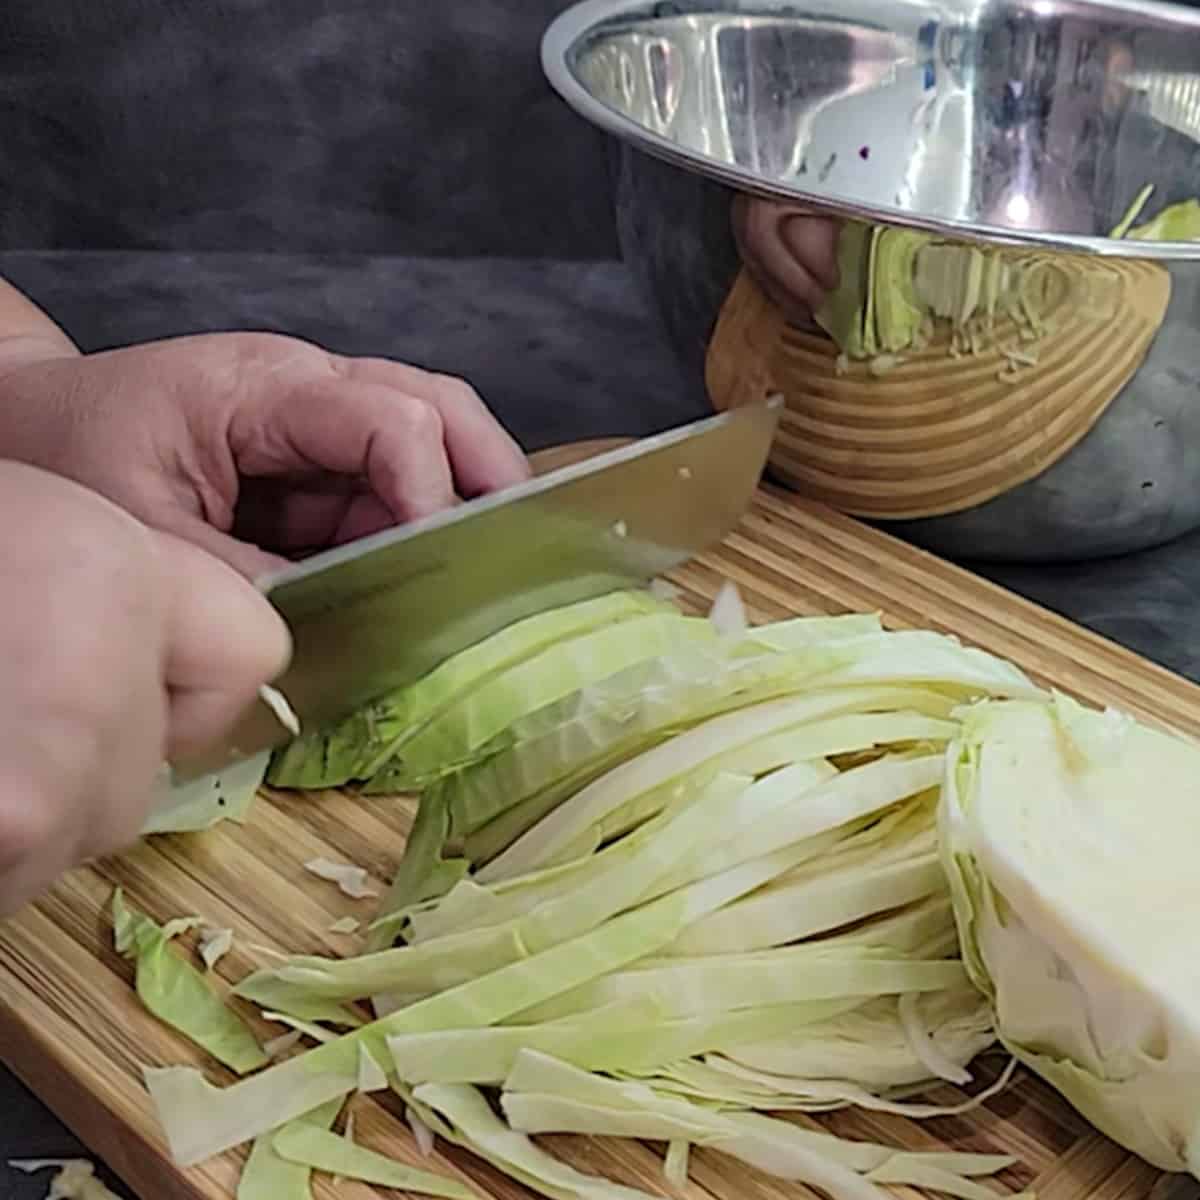 Cabbage head being sliced in preparation for dehydrating